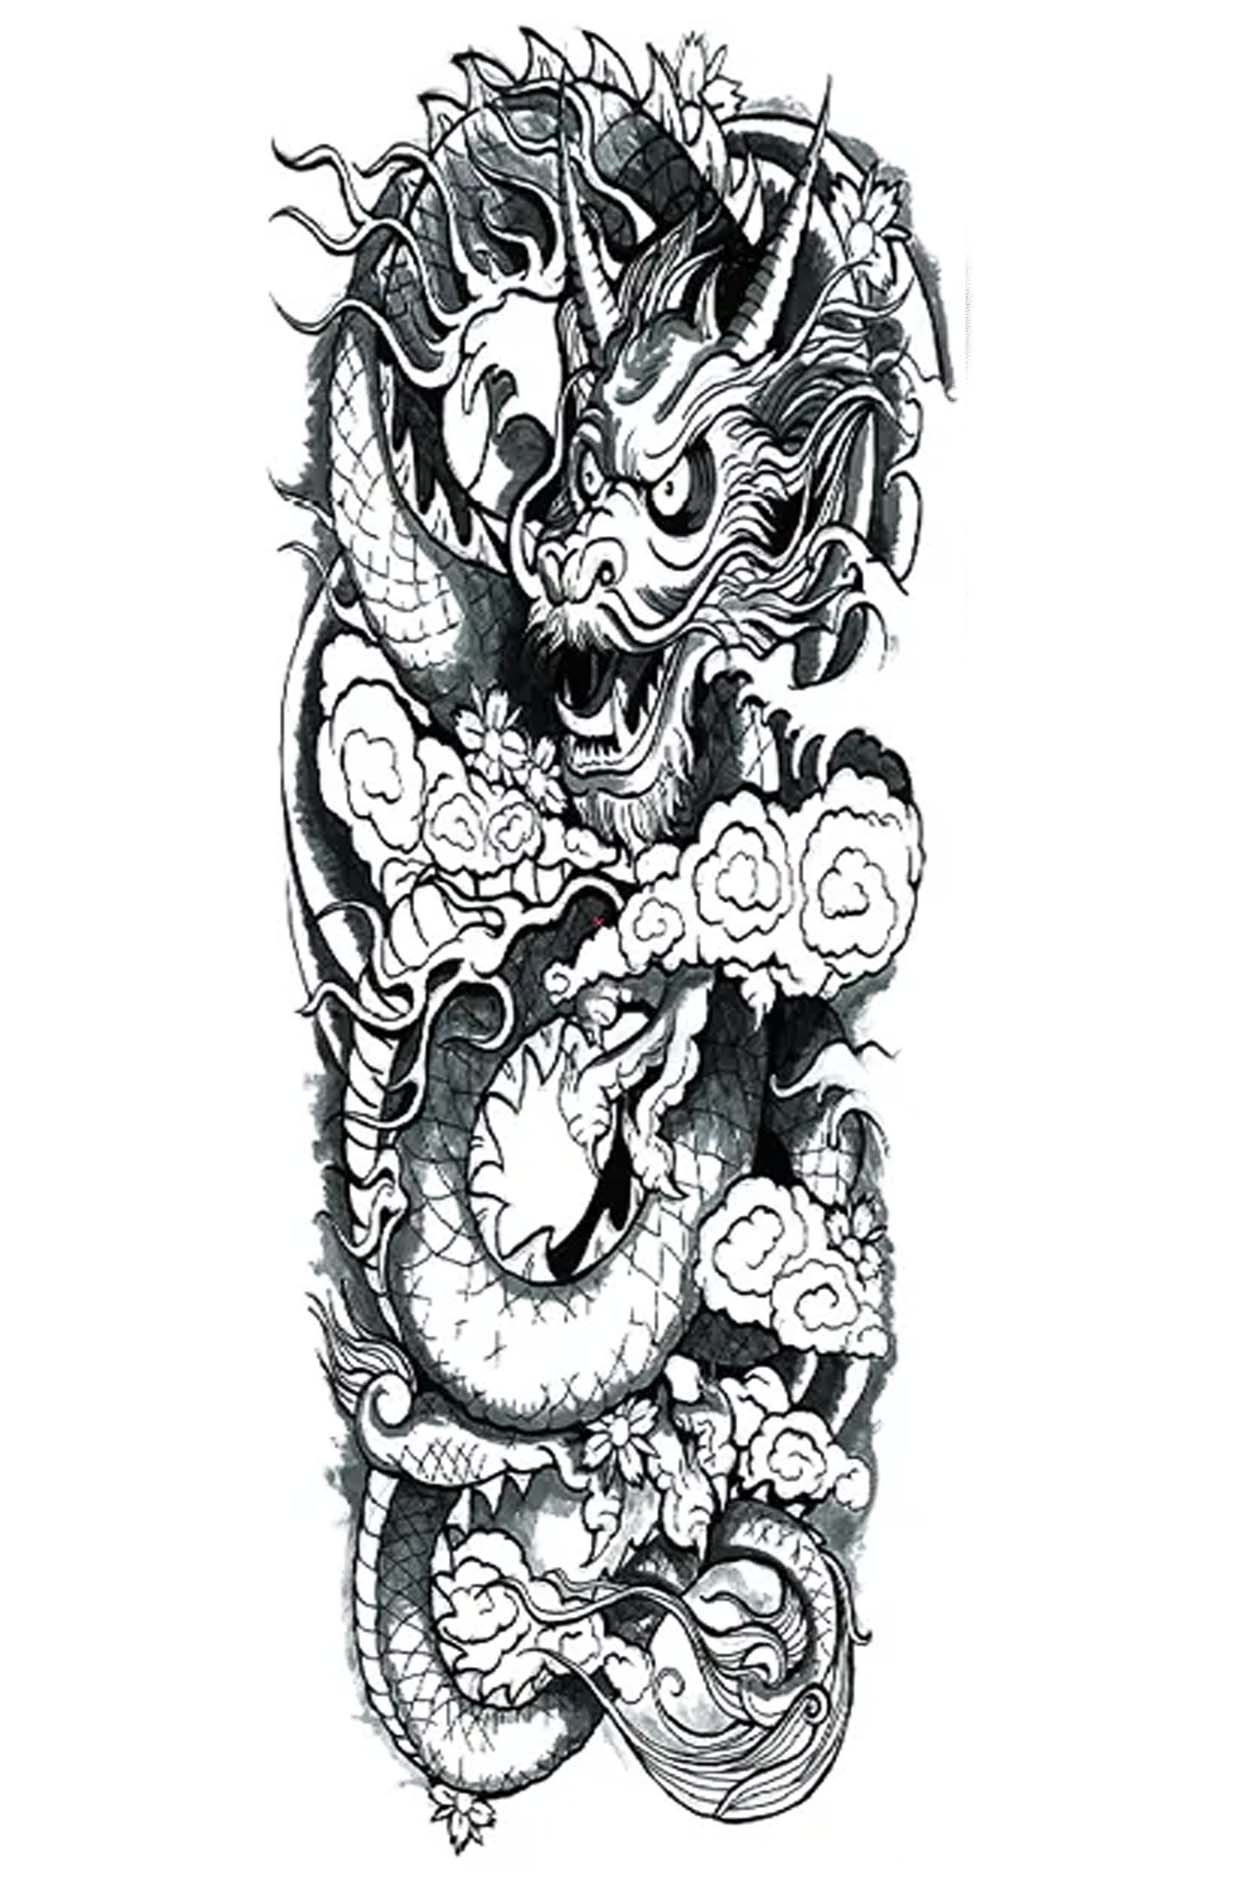 The head of the dragon is wrapped around the arm. The head is near the shoulder, with the tail curling around at the wrist. The head of the dragon is angry, fierce, and ready to fight. The dragon symbolizes power, change, and spirituality, and it also symbolizes good luck, fortune, and prosperity. In some cultures, the dragon is a protector and is often associated with royalty. Wear this traditional artwork on an arm, leg, or back.